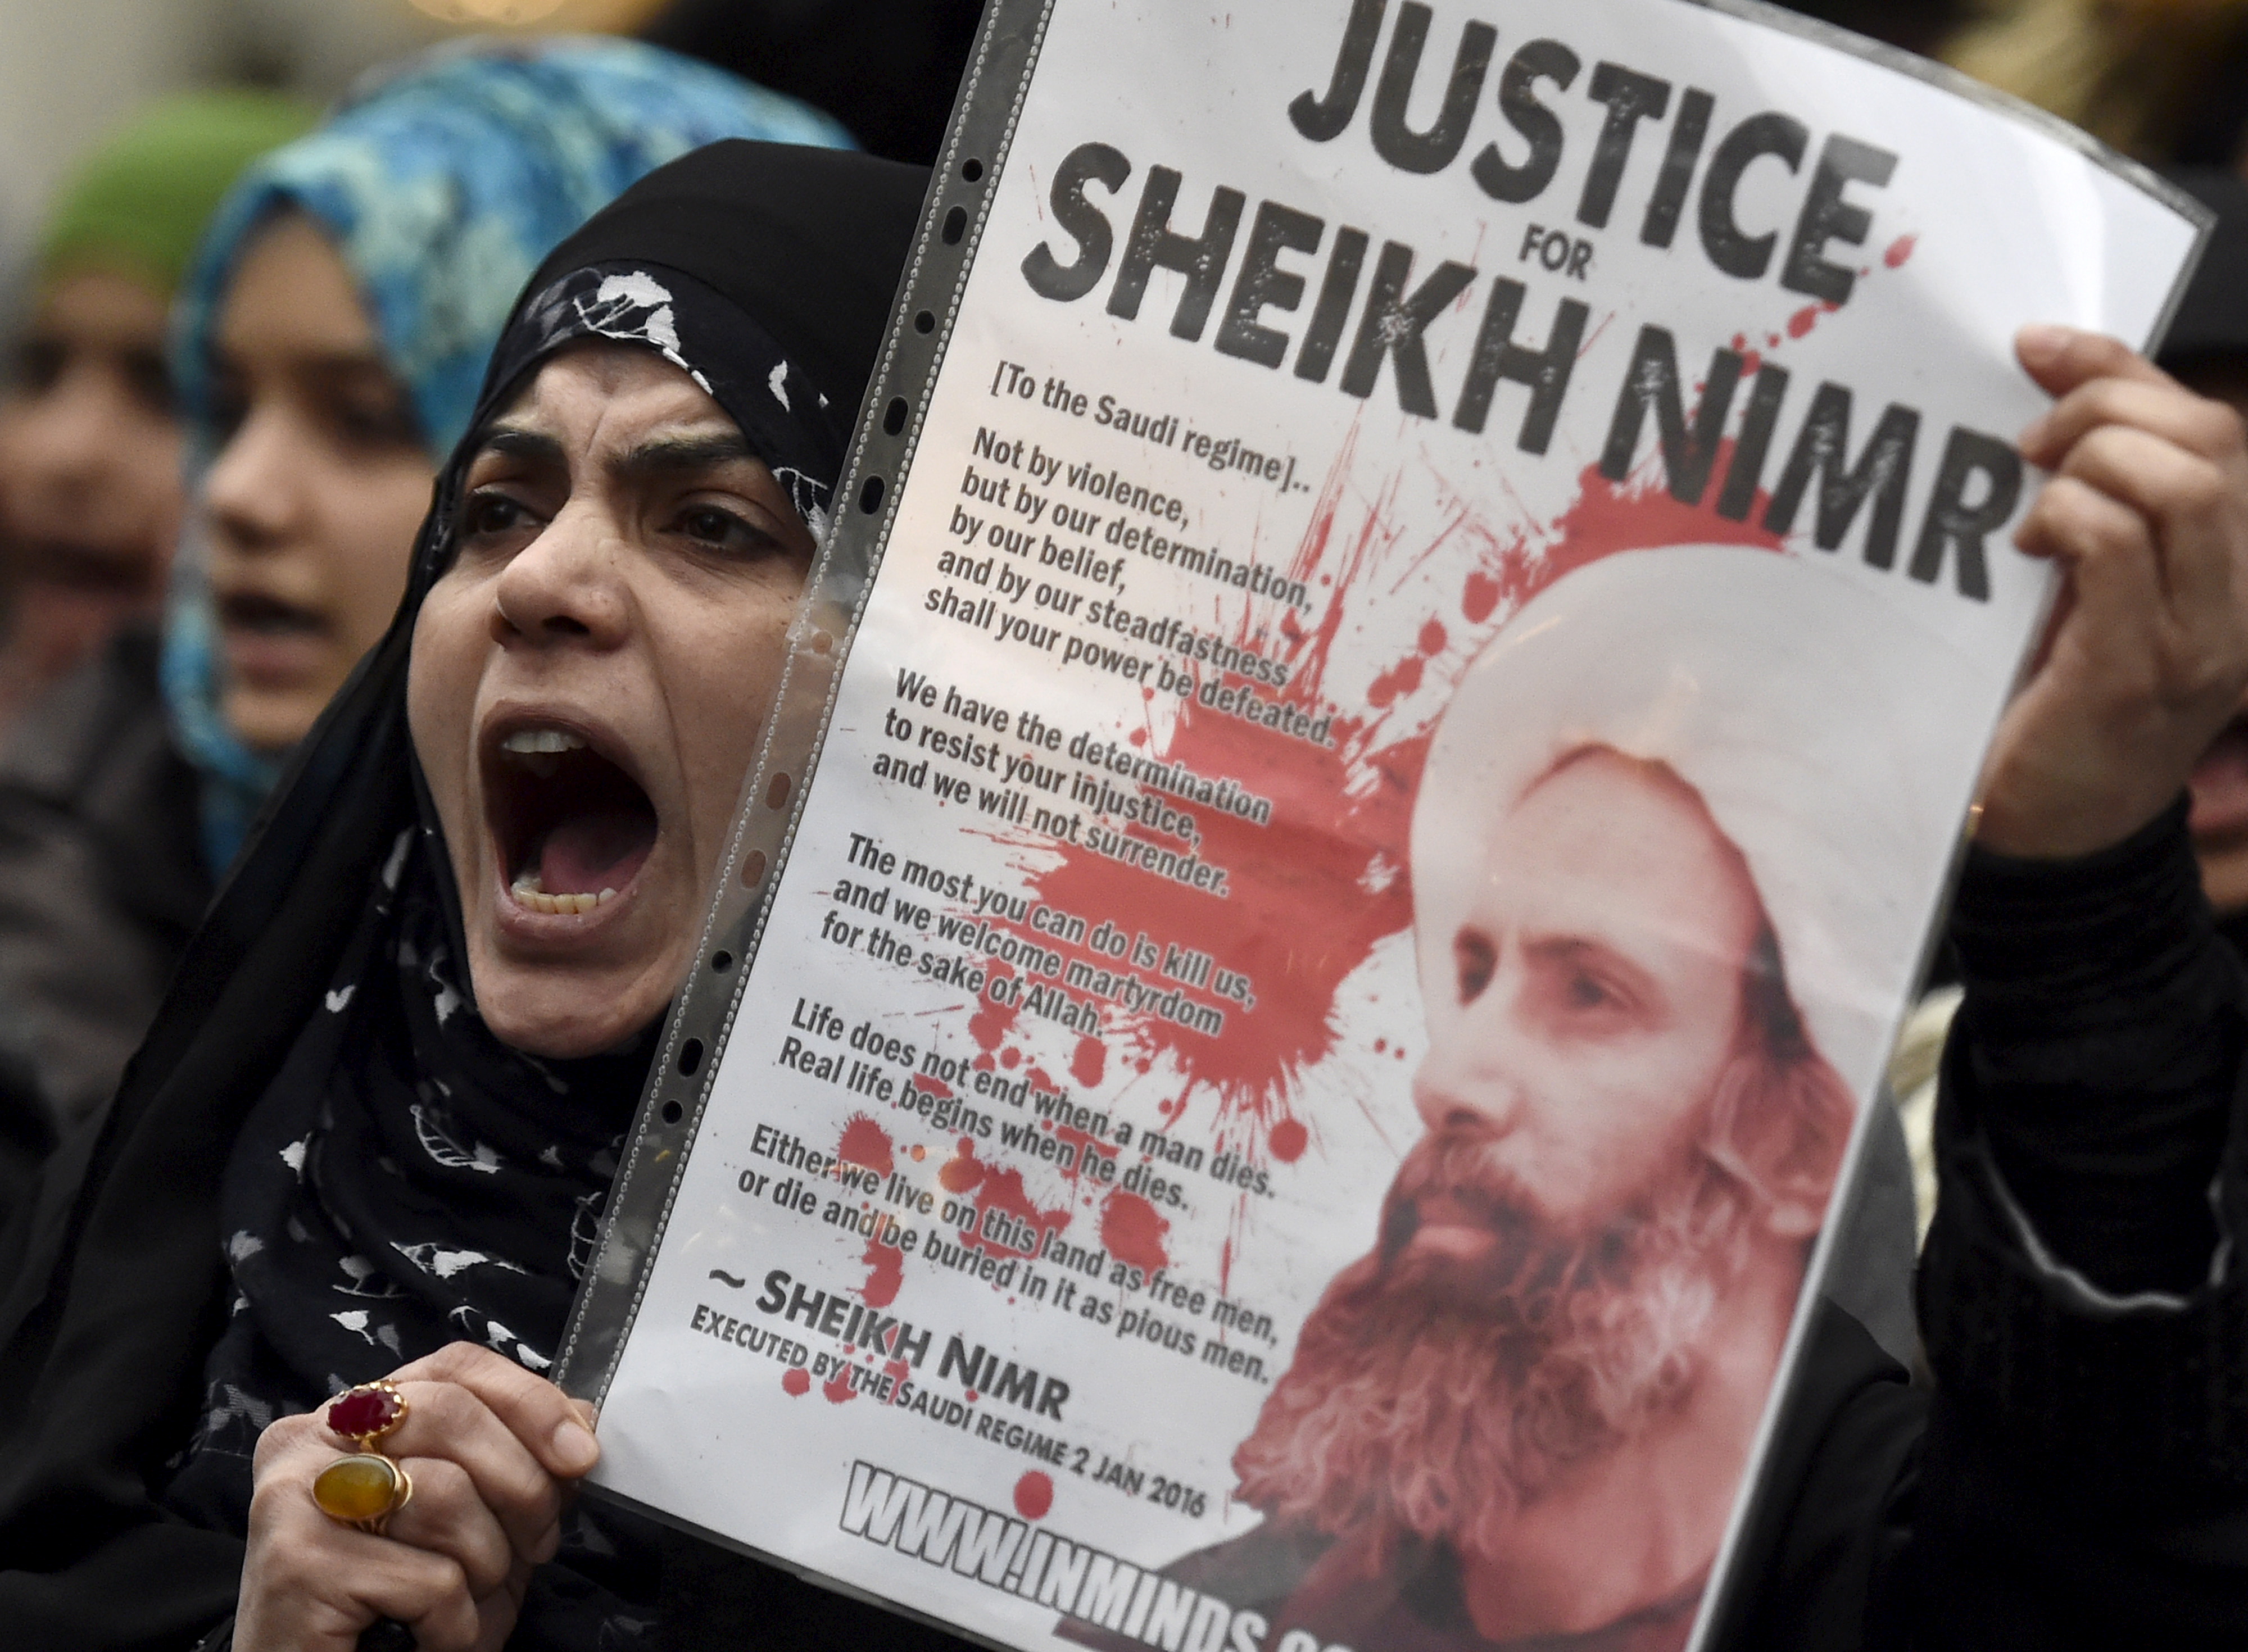 Demonstration outside Saudi Arabian Embassy in London, Jan 3, 2016. protesting execution of Shi'ite cleric Sheikh Nimr al-Nimr in Saudi Arabia. Photo by REUTERS / Toby Melville.